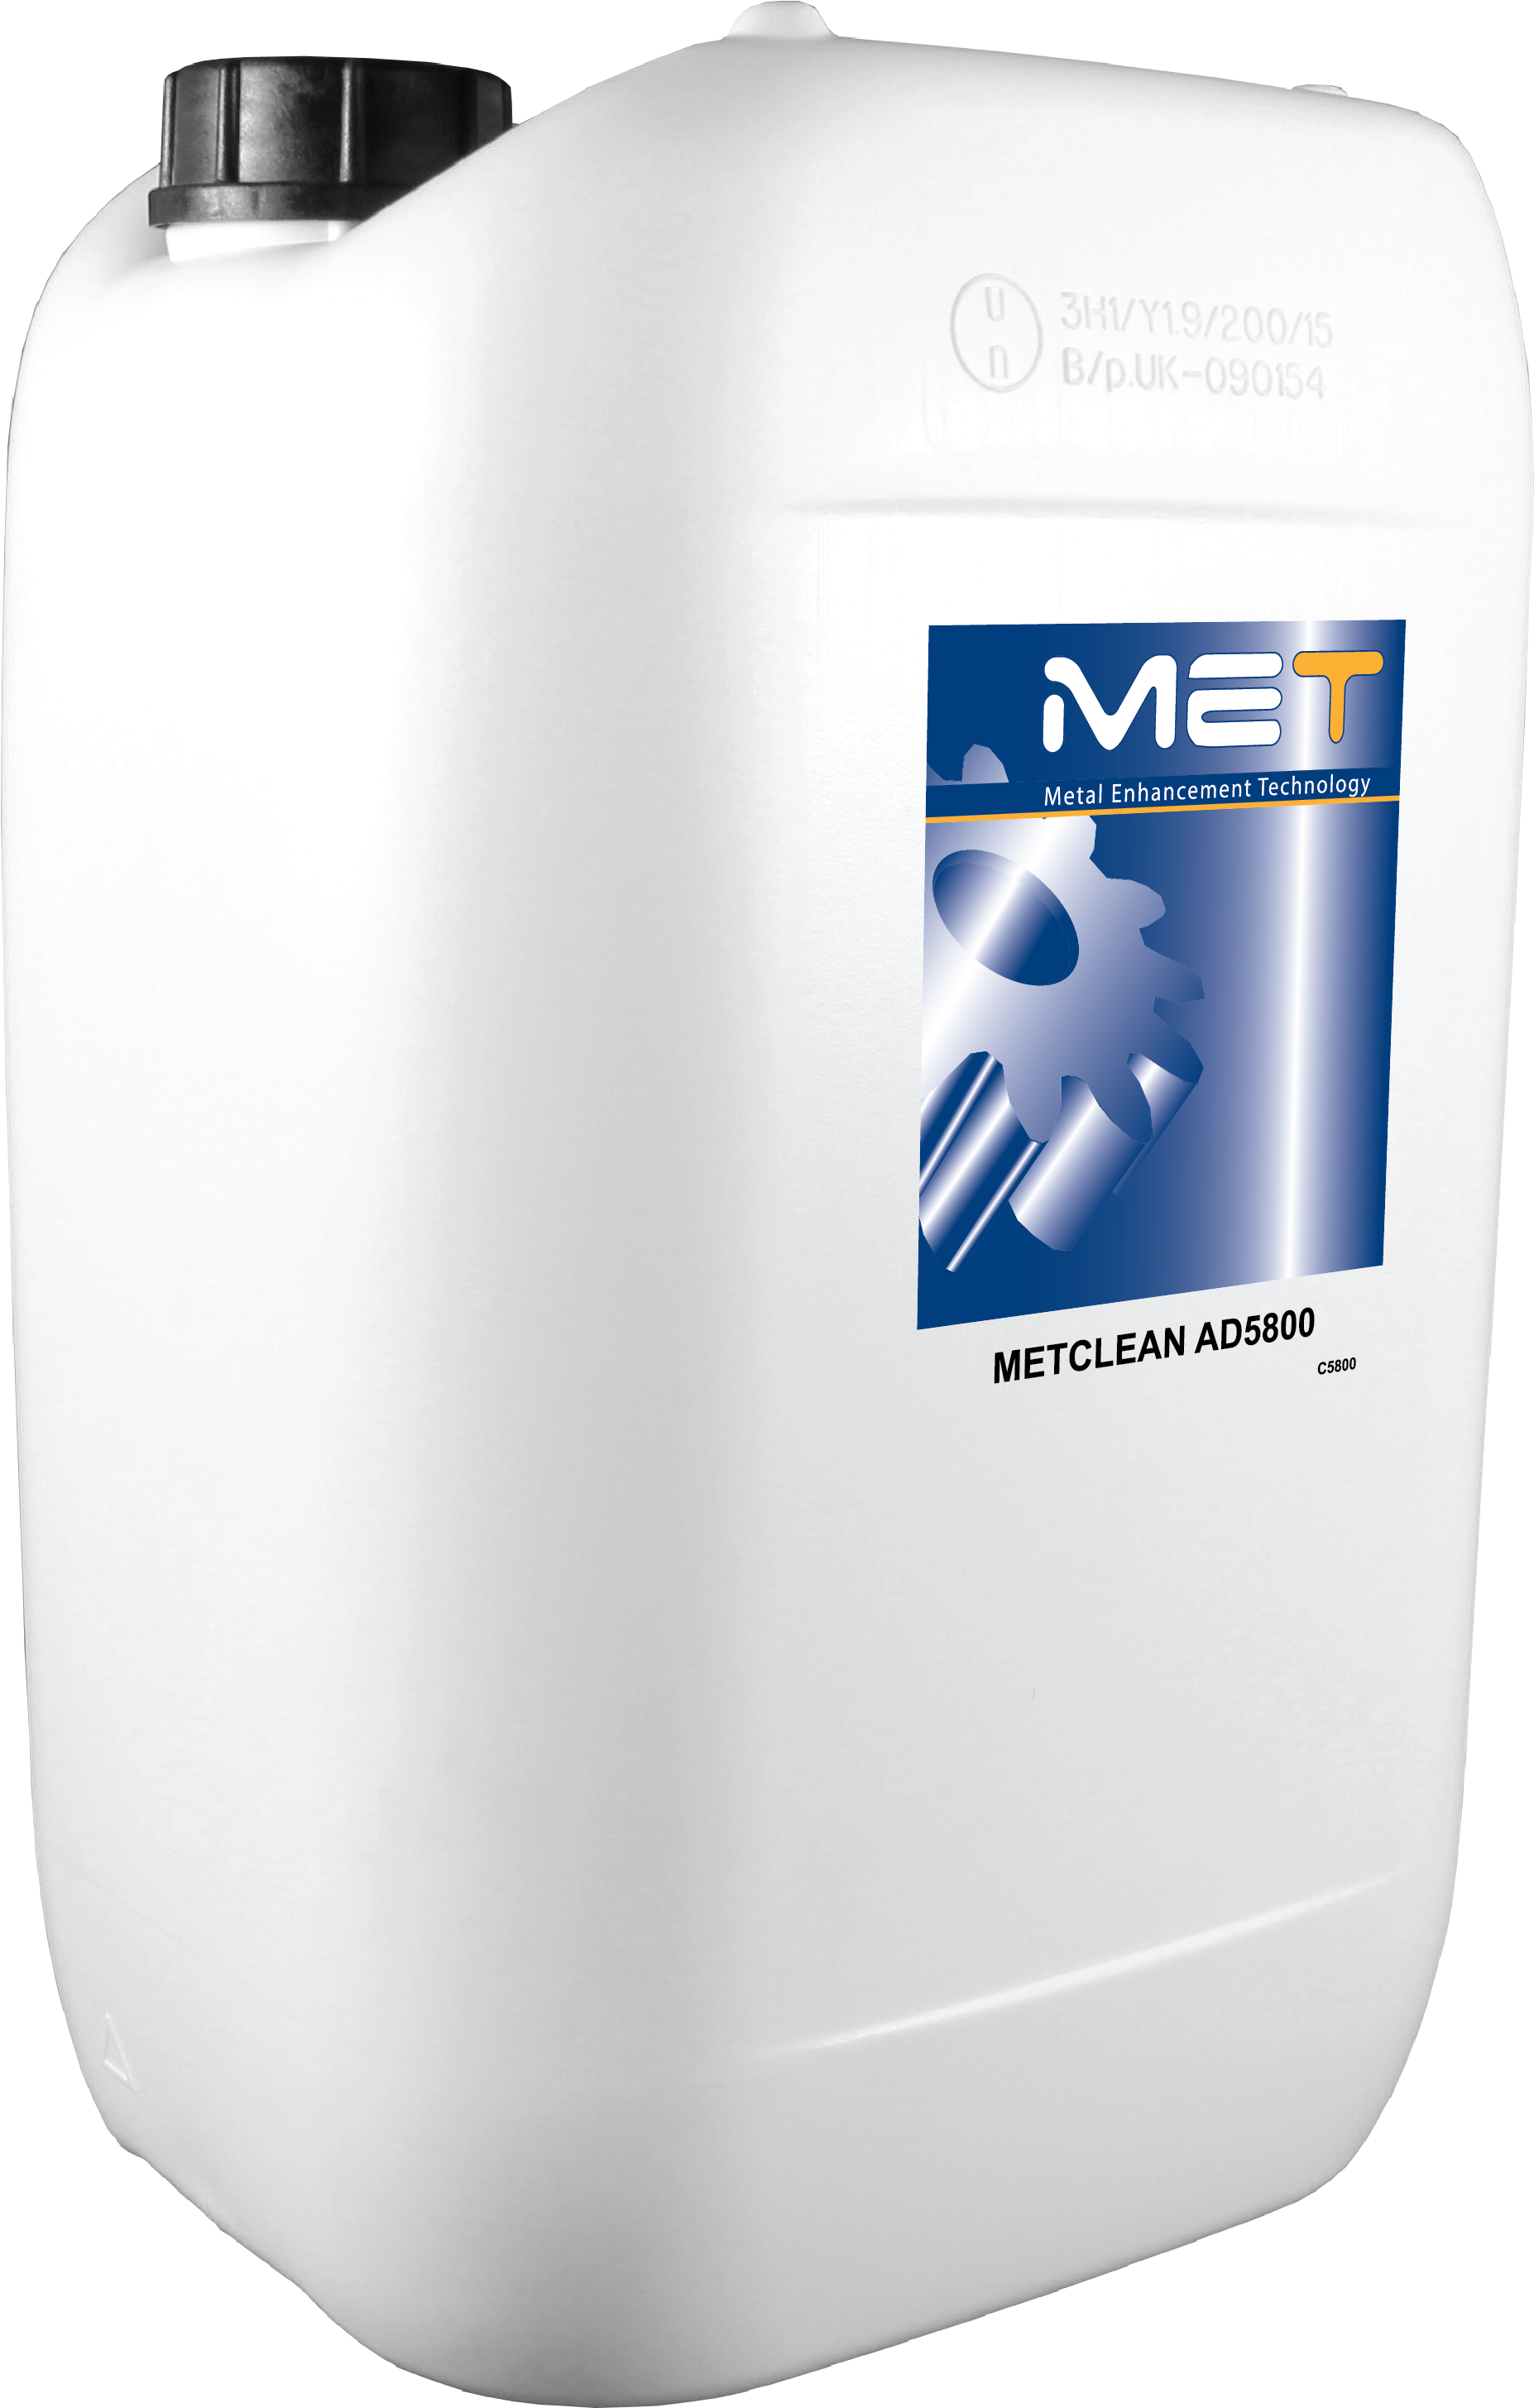 Metclean AD5800